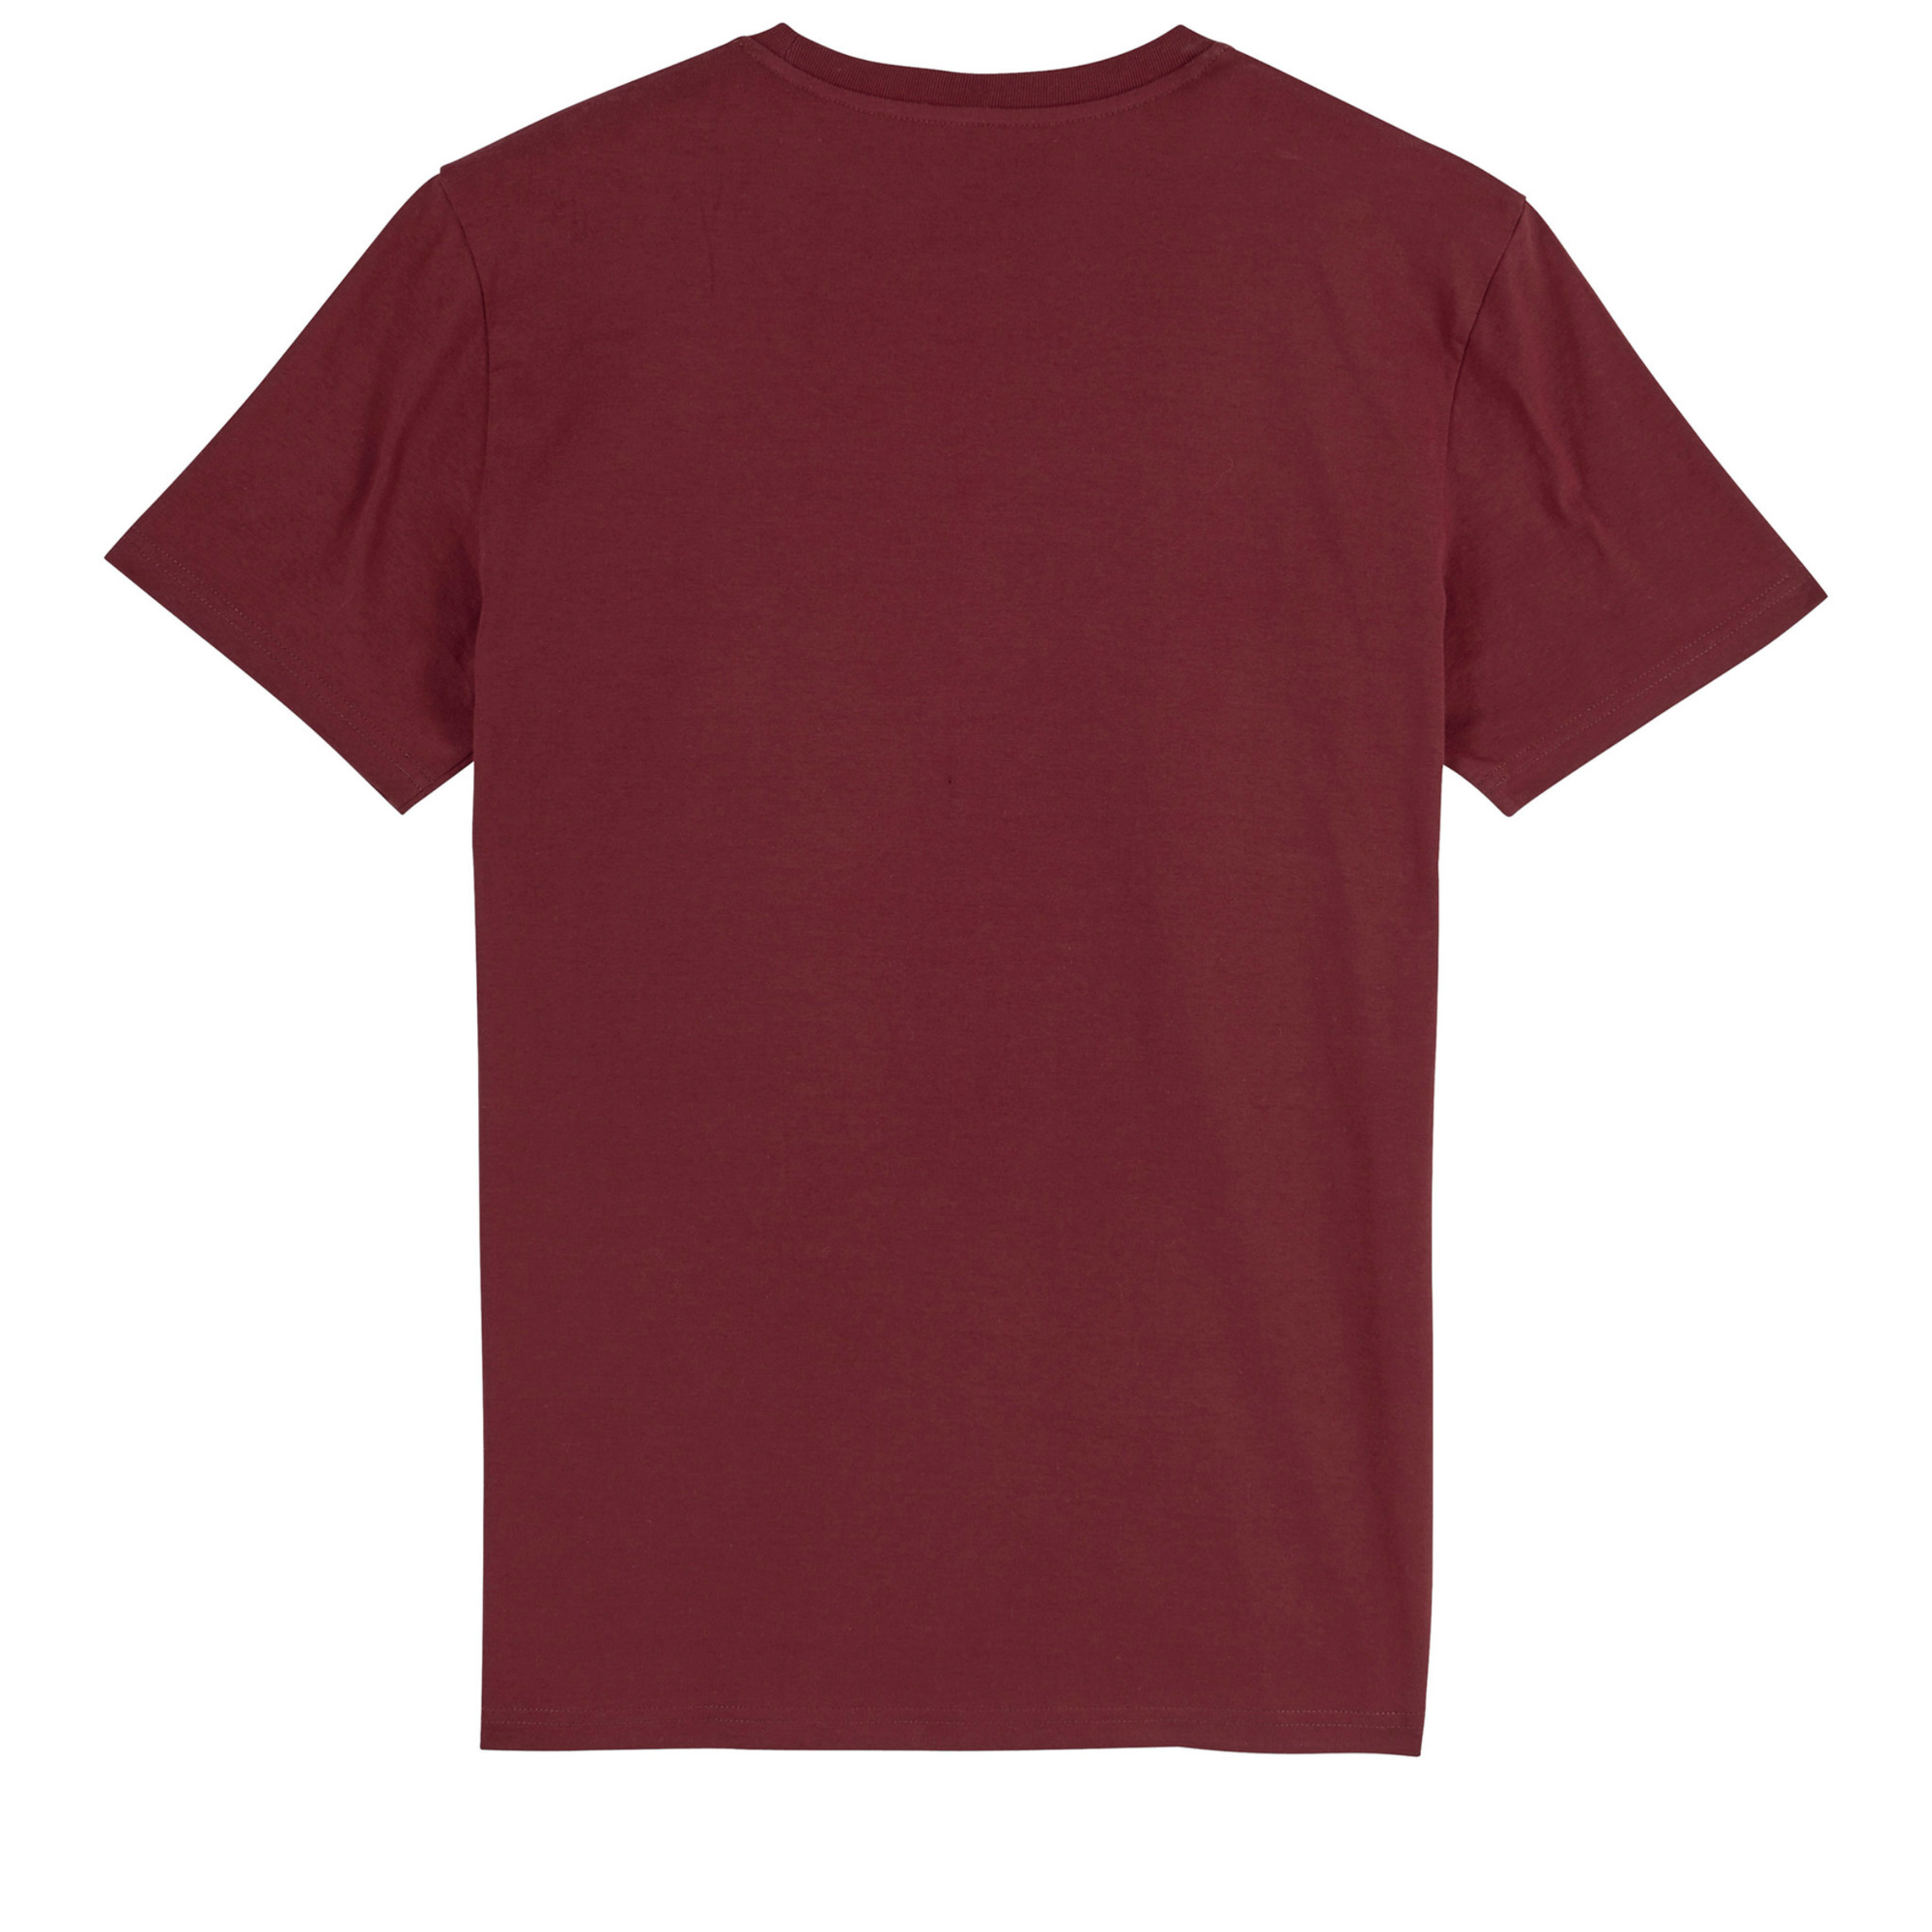 Find Your Voice Eco Tee (7 Colours)